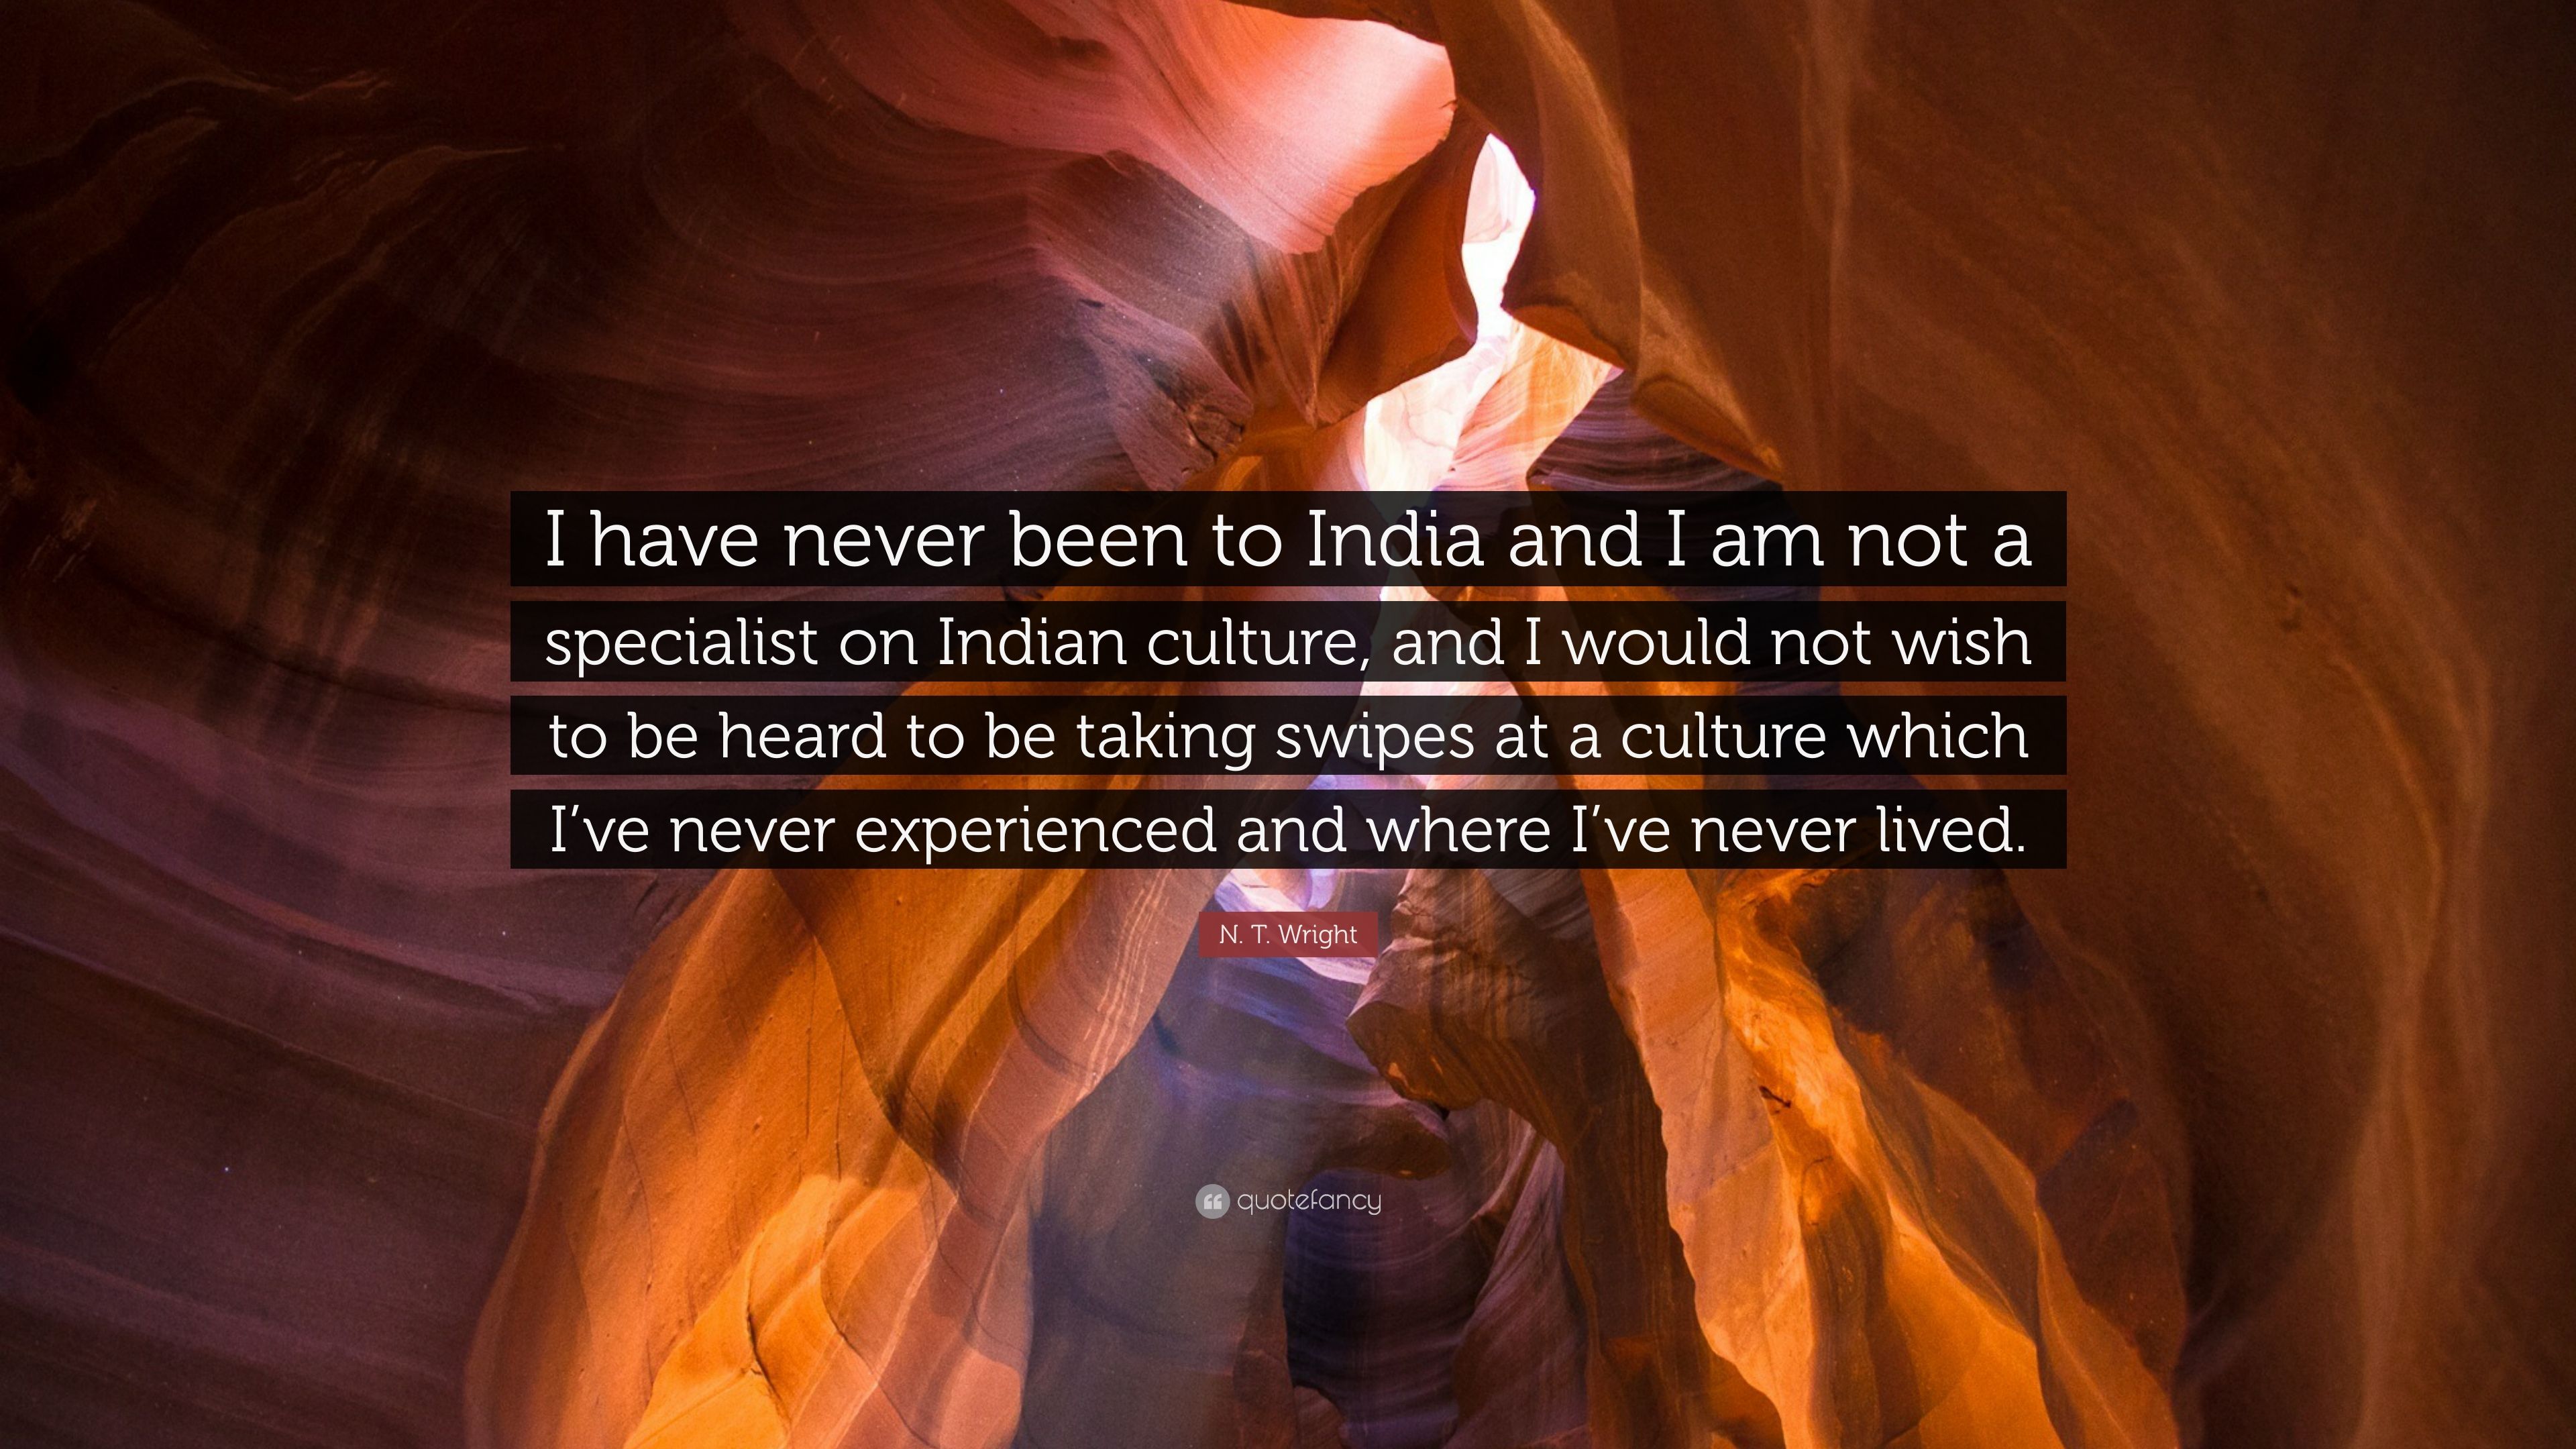 N. T. Wright Quote: “I have never been to India and I am not a